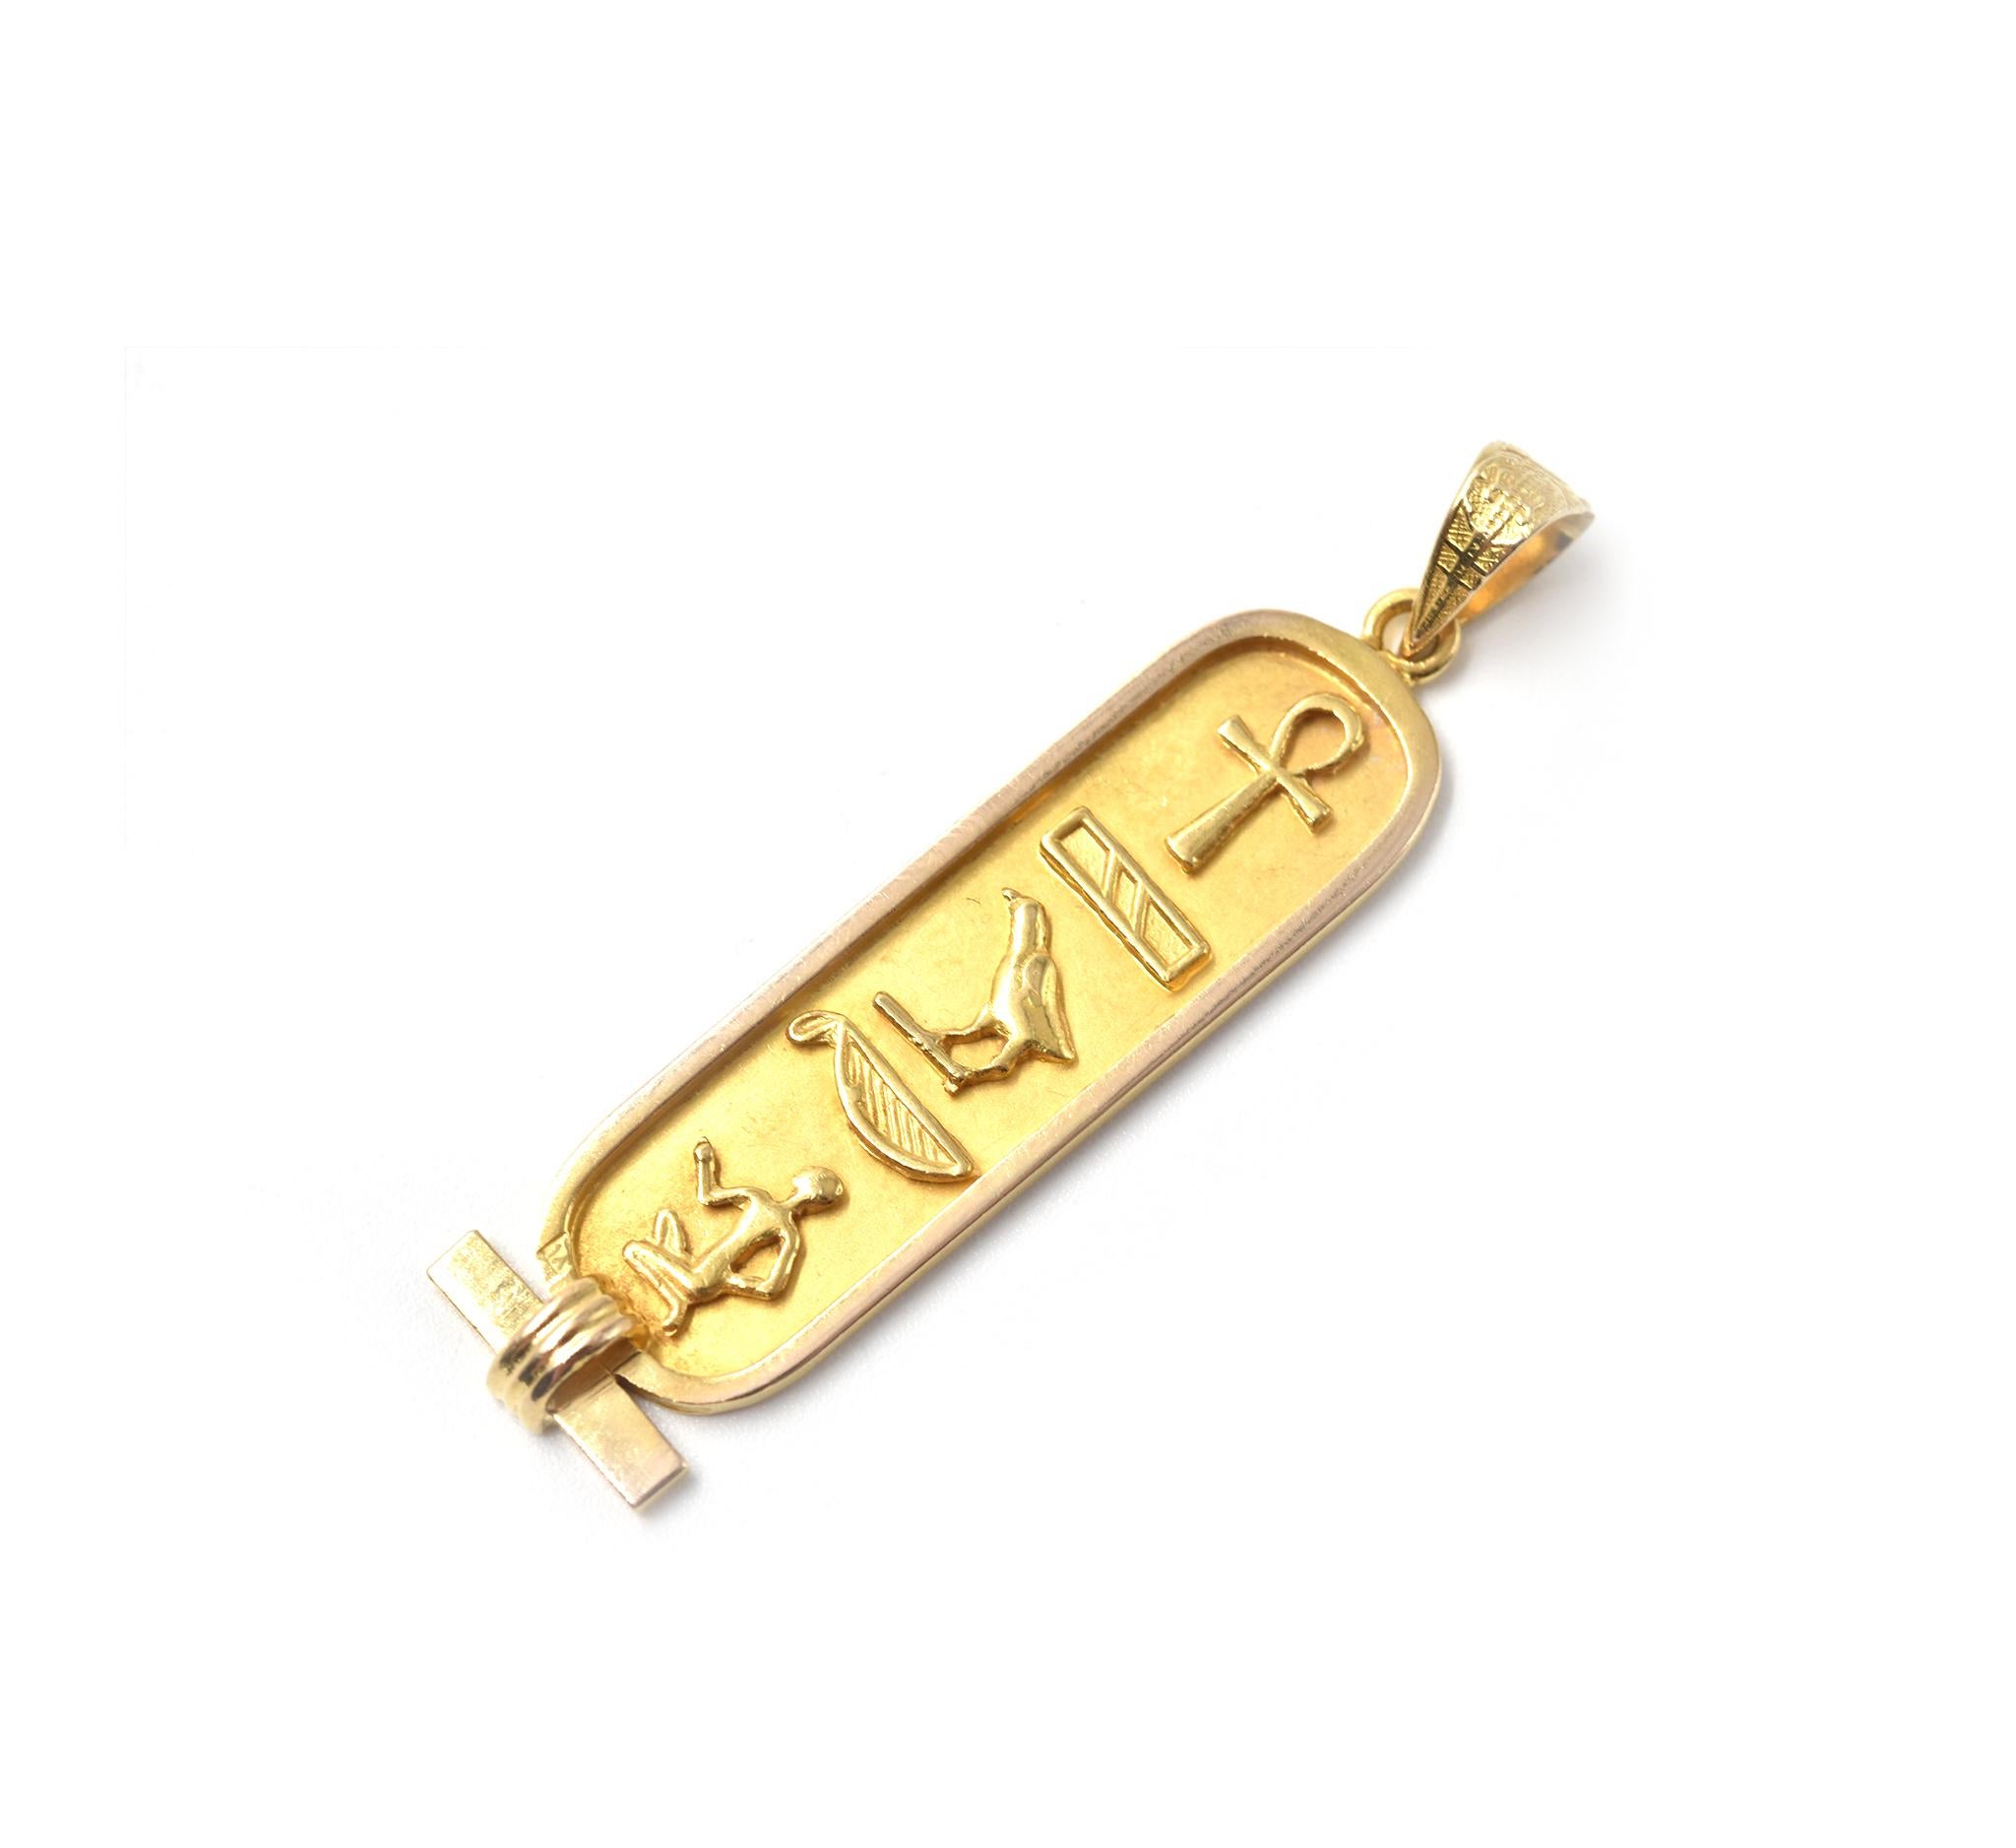 Designer: custom design
Material: 18k yellow gold
Dimensions: pendant is 1 3/4-inch long and 3/8-inch wide
Weight: 3.69 grams

